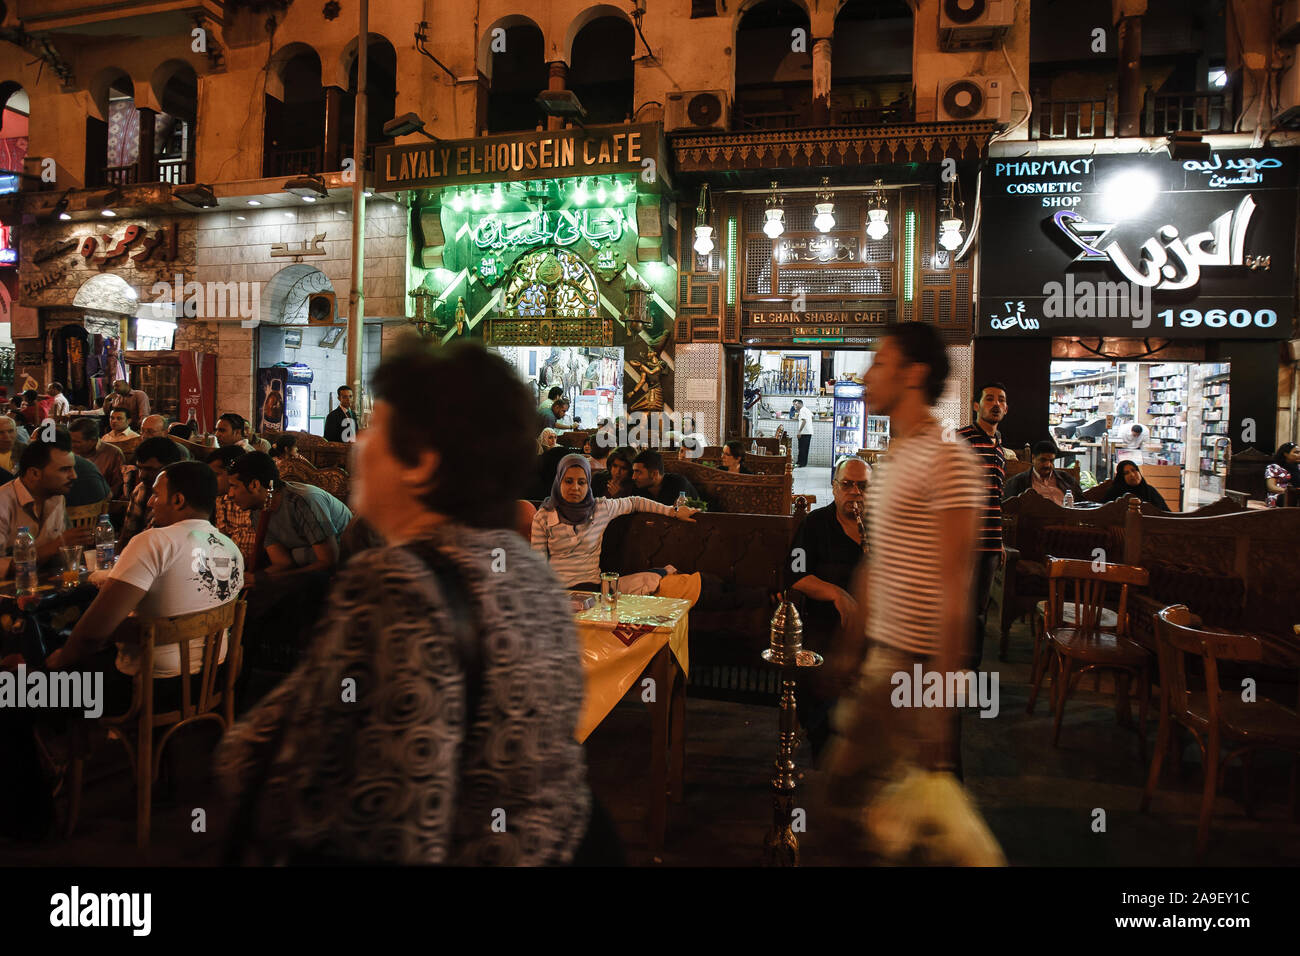 Cairo, Egypt, May 2, 2008: People sit outside bars and shops in the Khan el-Khalili bazaar district of Cairo. Stock Photo